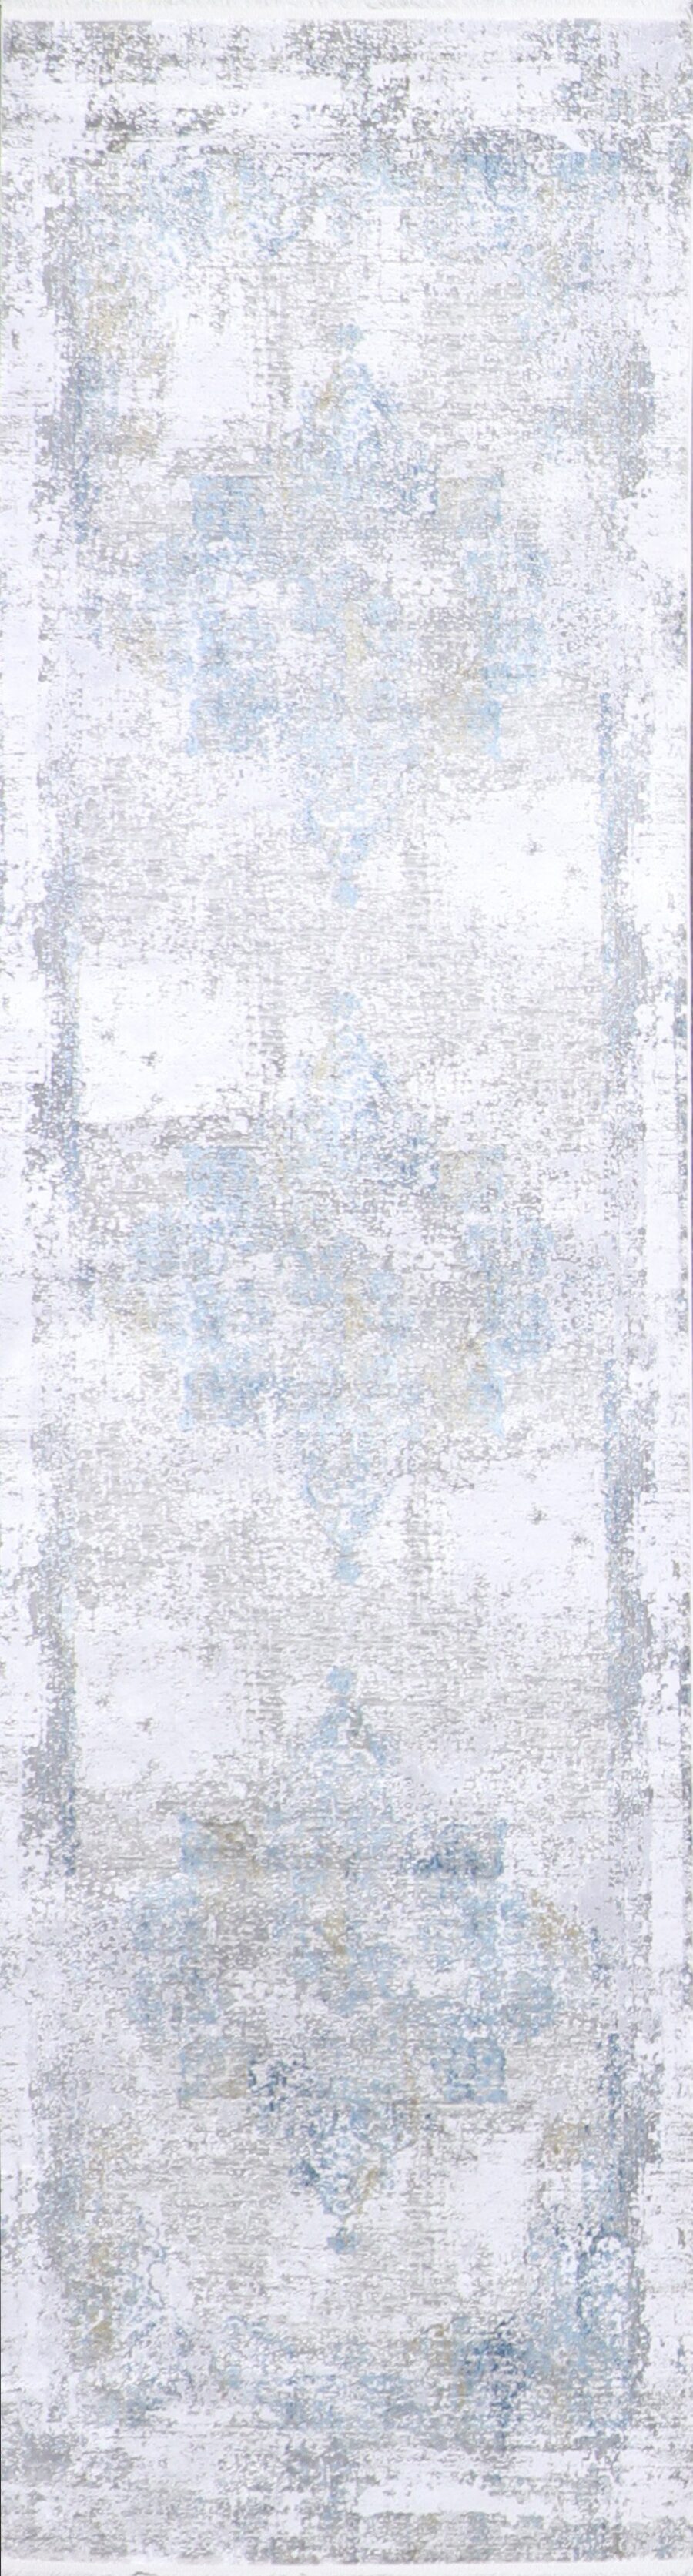 2’7”x9’10”Transitional Gray & Silver Wool & Silk Hand-Finished Rug - Direct Rug Import | Rugs in Chicago, Indiana,South Bend,Granger